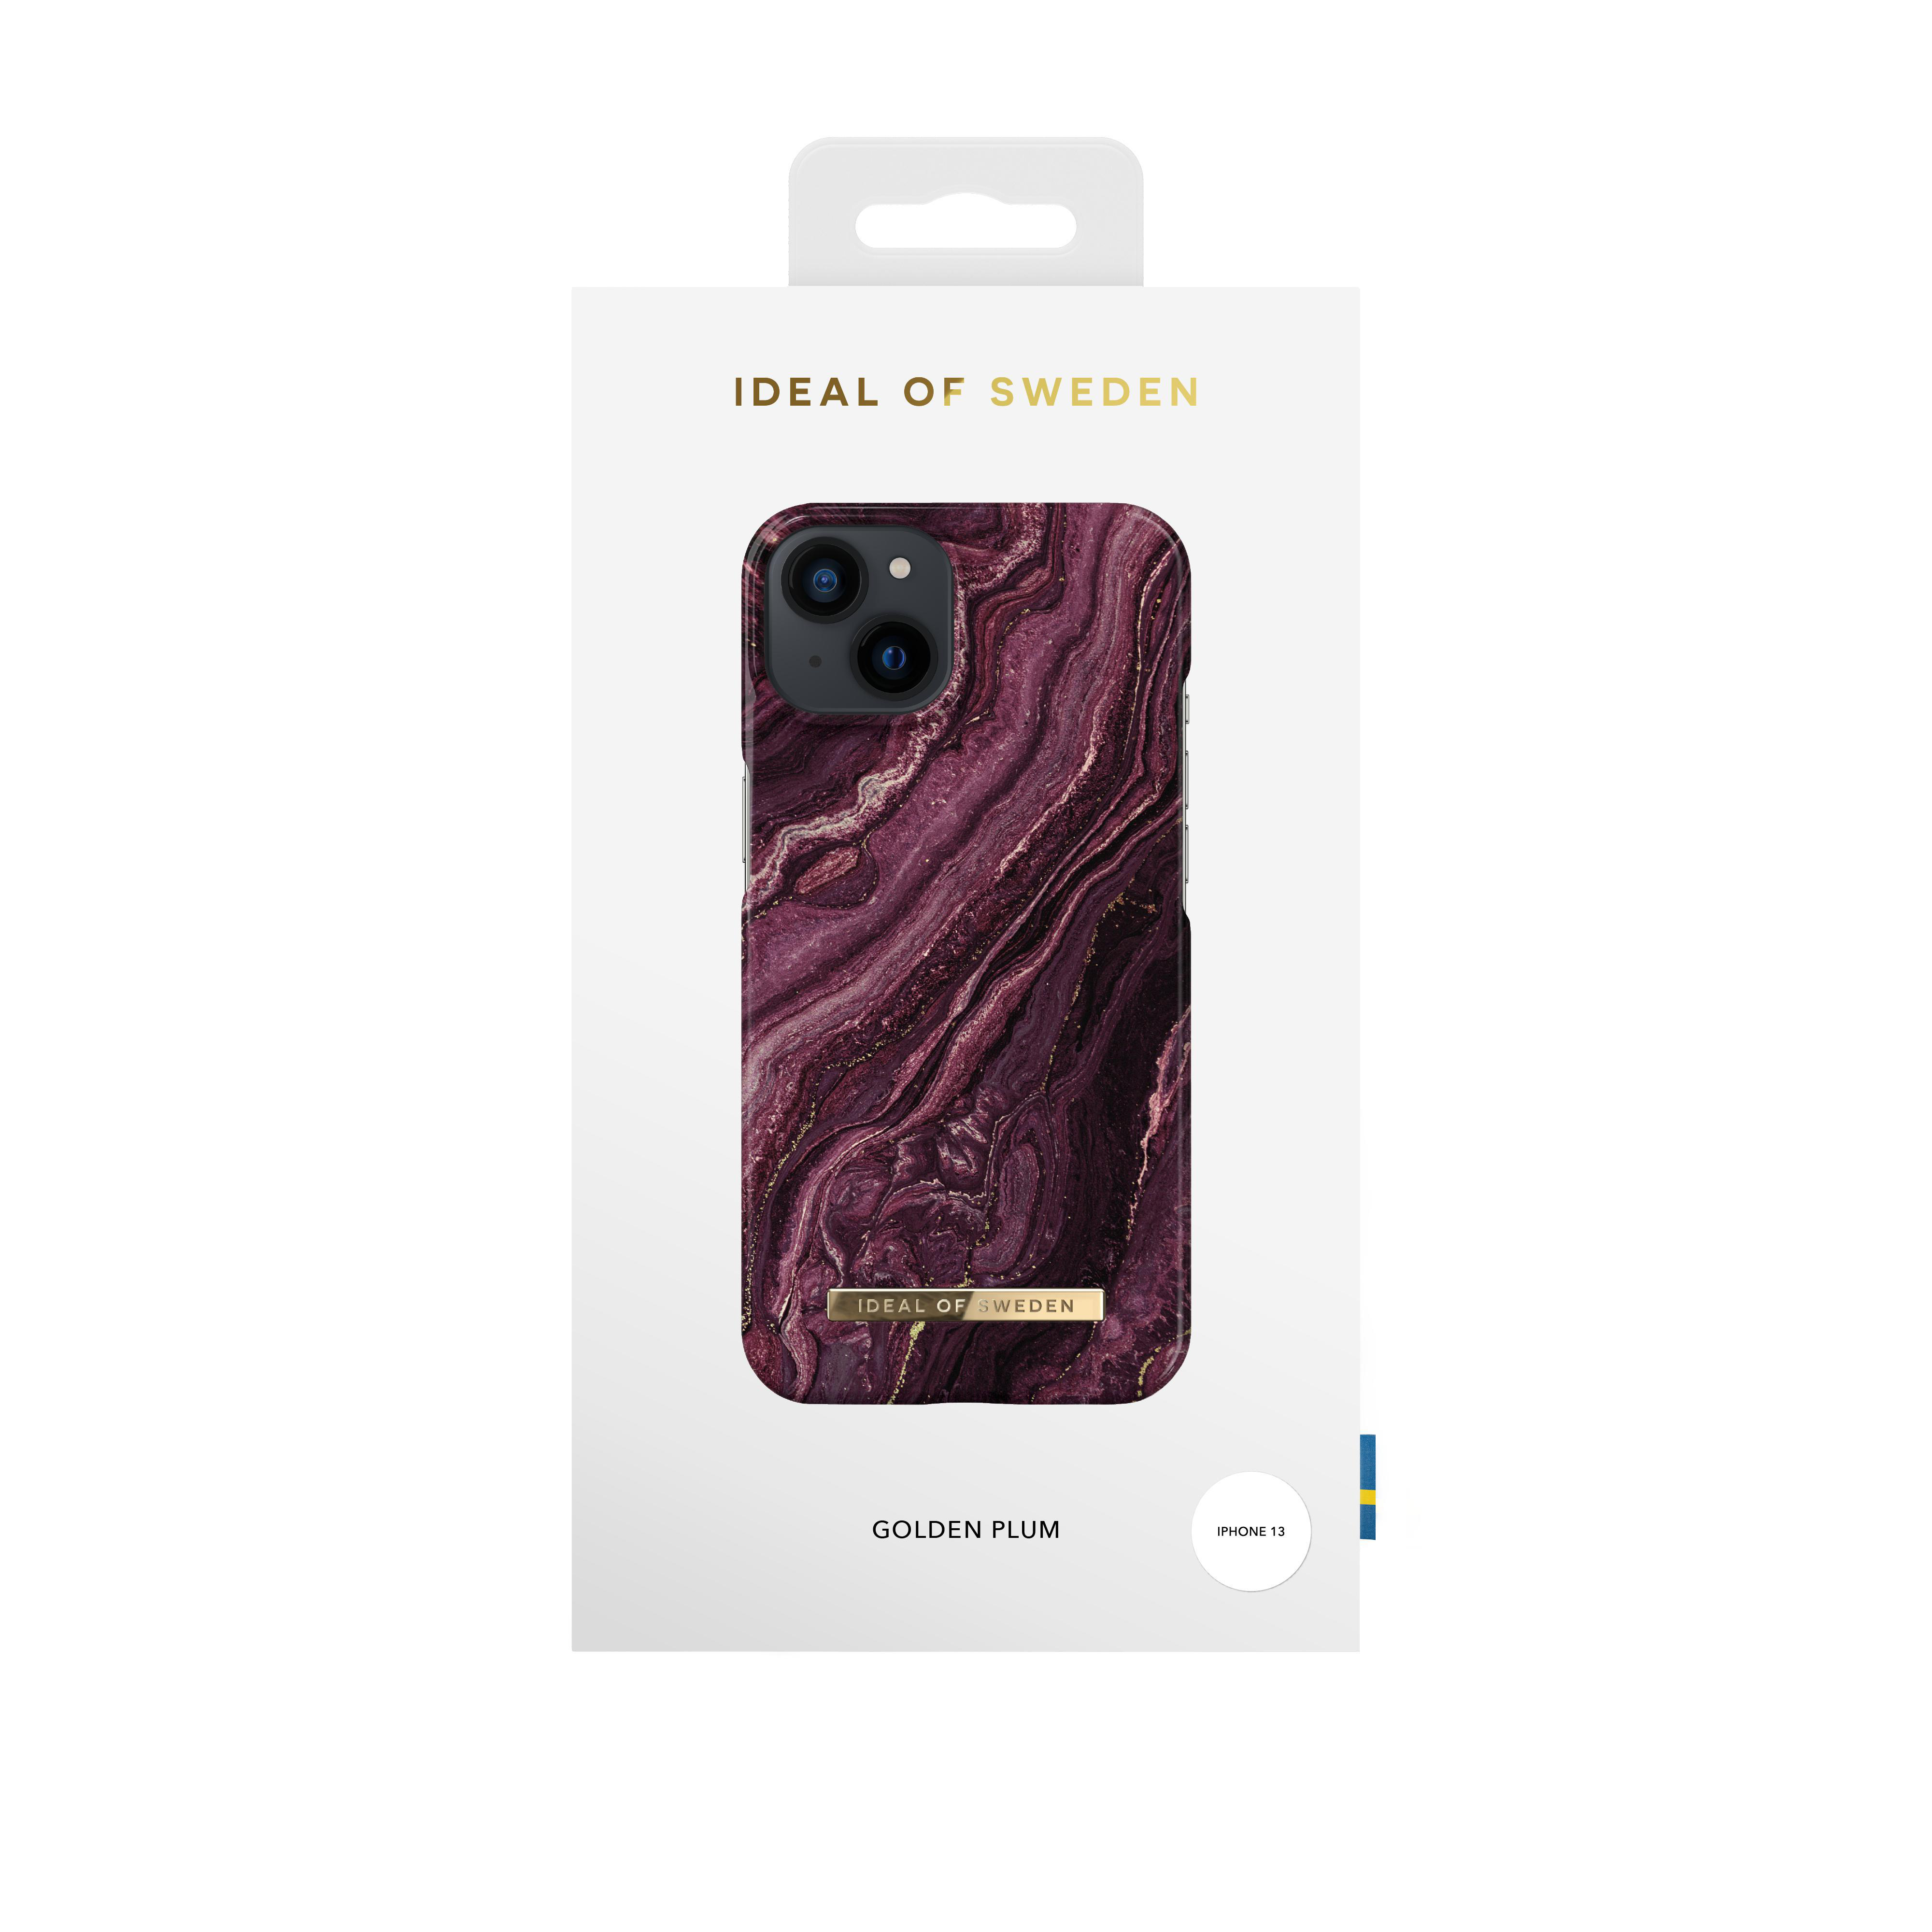 SWEDEN Backcover, Case, Apple, Fashion Golden Plum IDEAL 13, OF iPhone